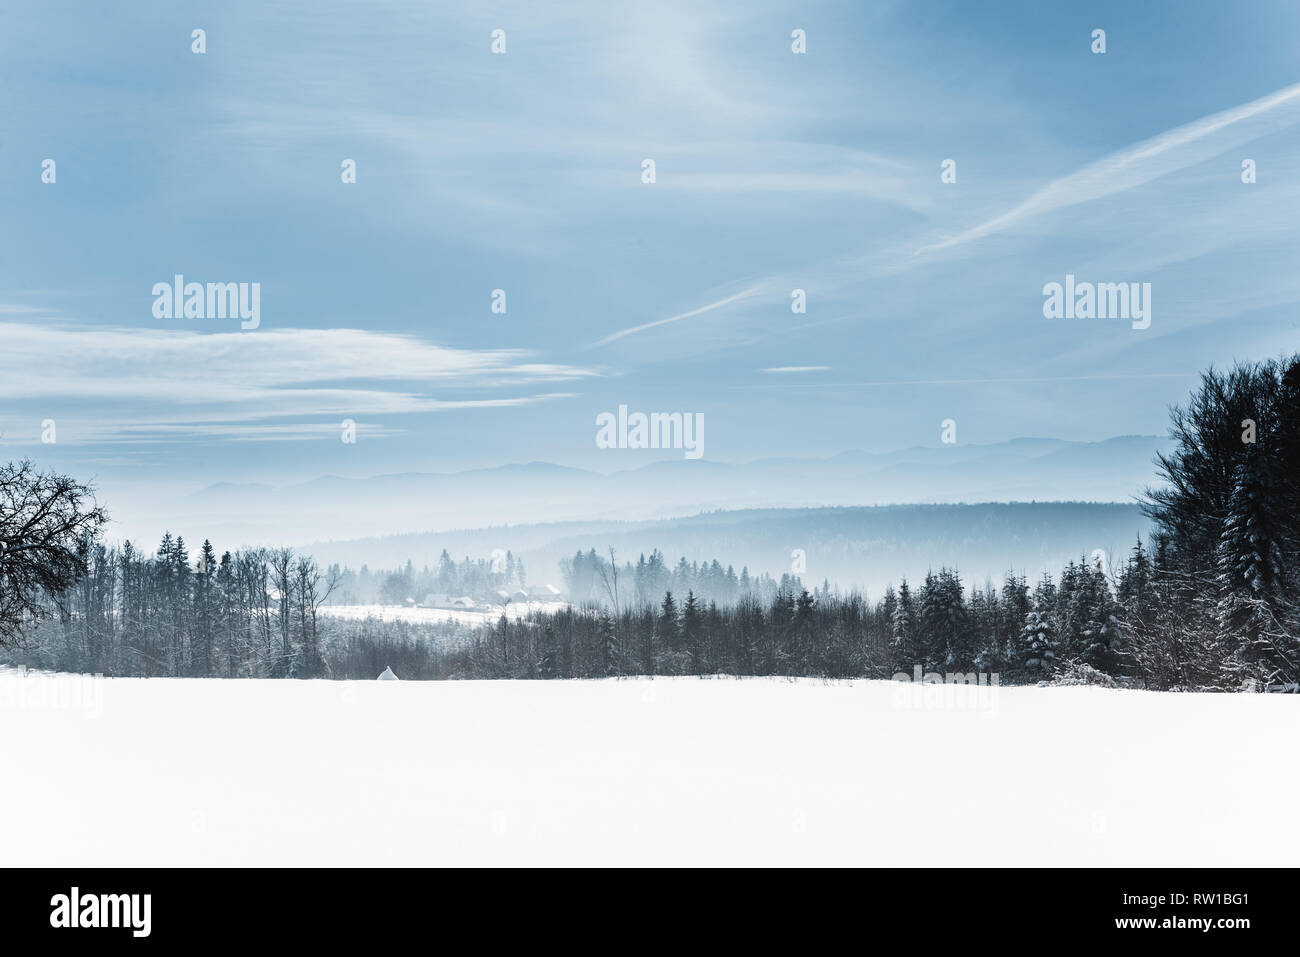 landscape with snowy white carpathian mountains and trees in winter Stock Photo